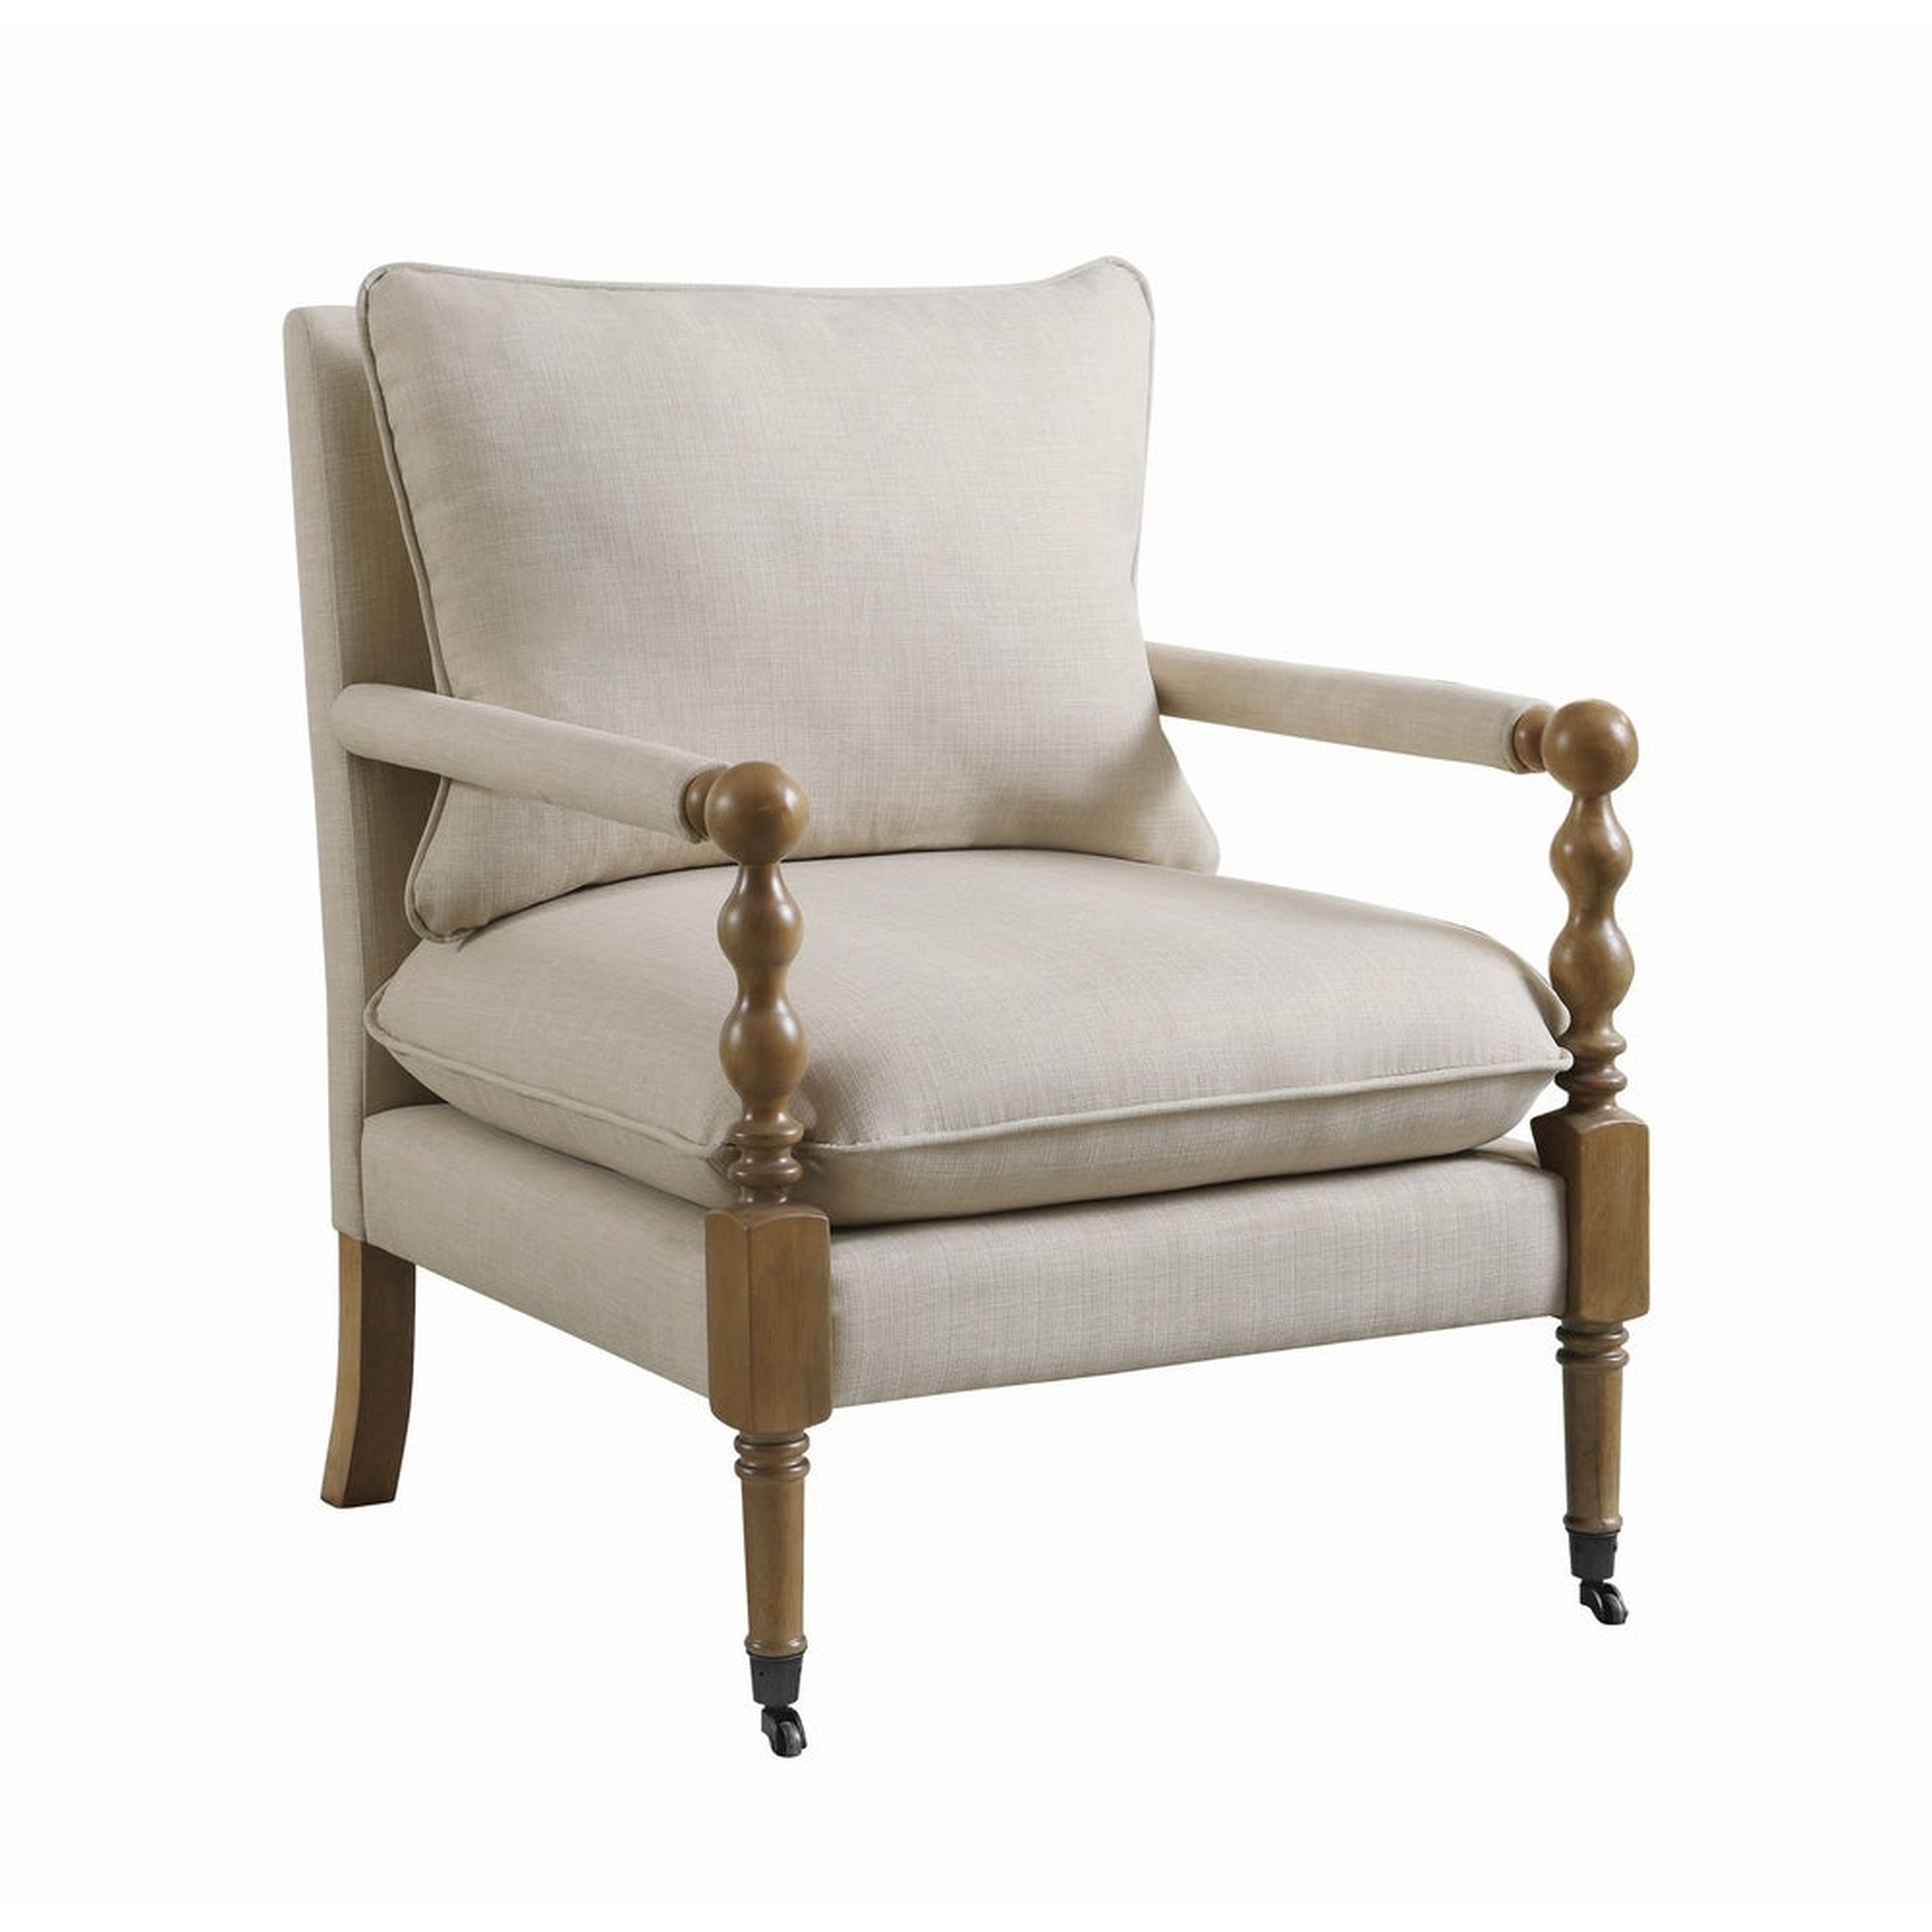 The Gray Barn Morning Glory Upholstered Accent Chair with Casters - Beige - Overstock